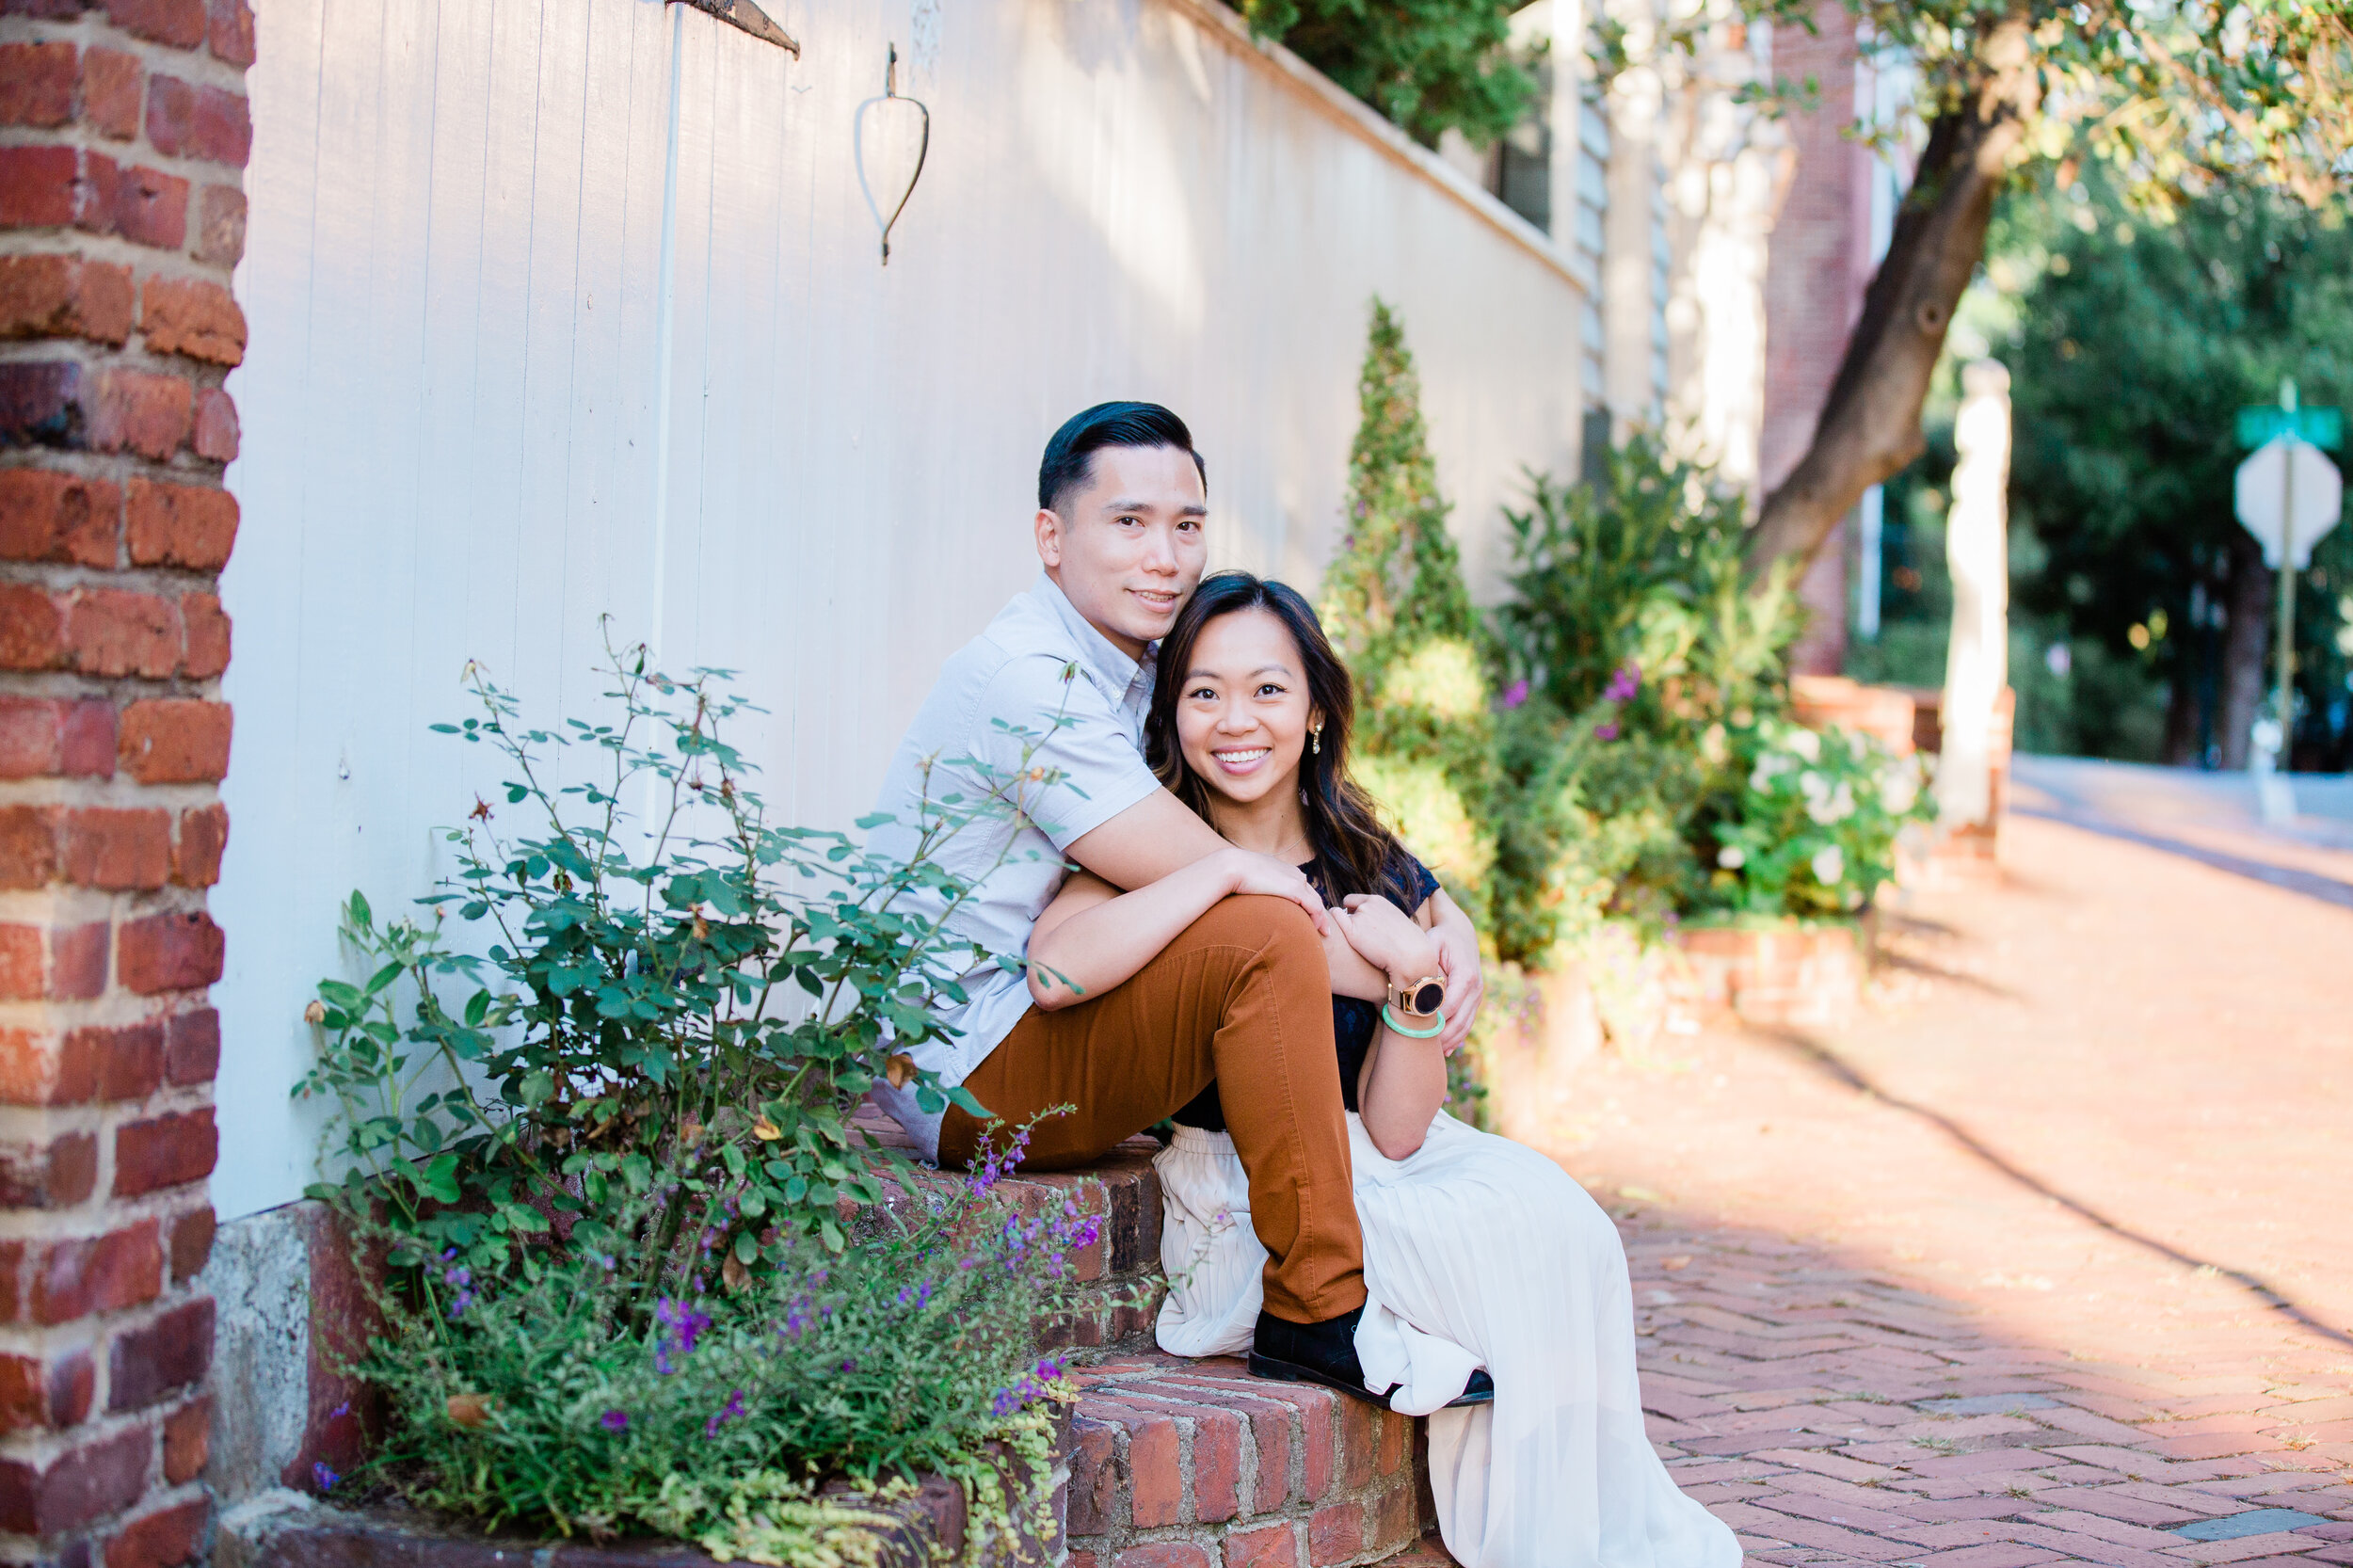 old_town_alexandria_engagements-4305.jpg